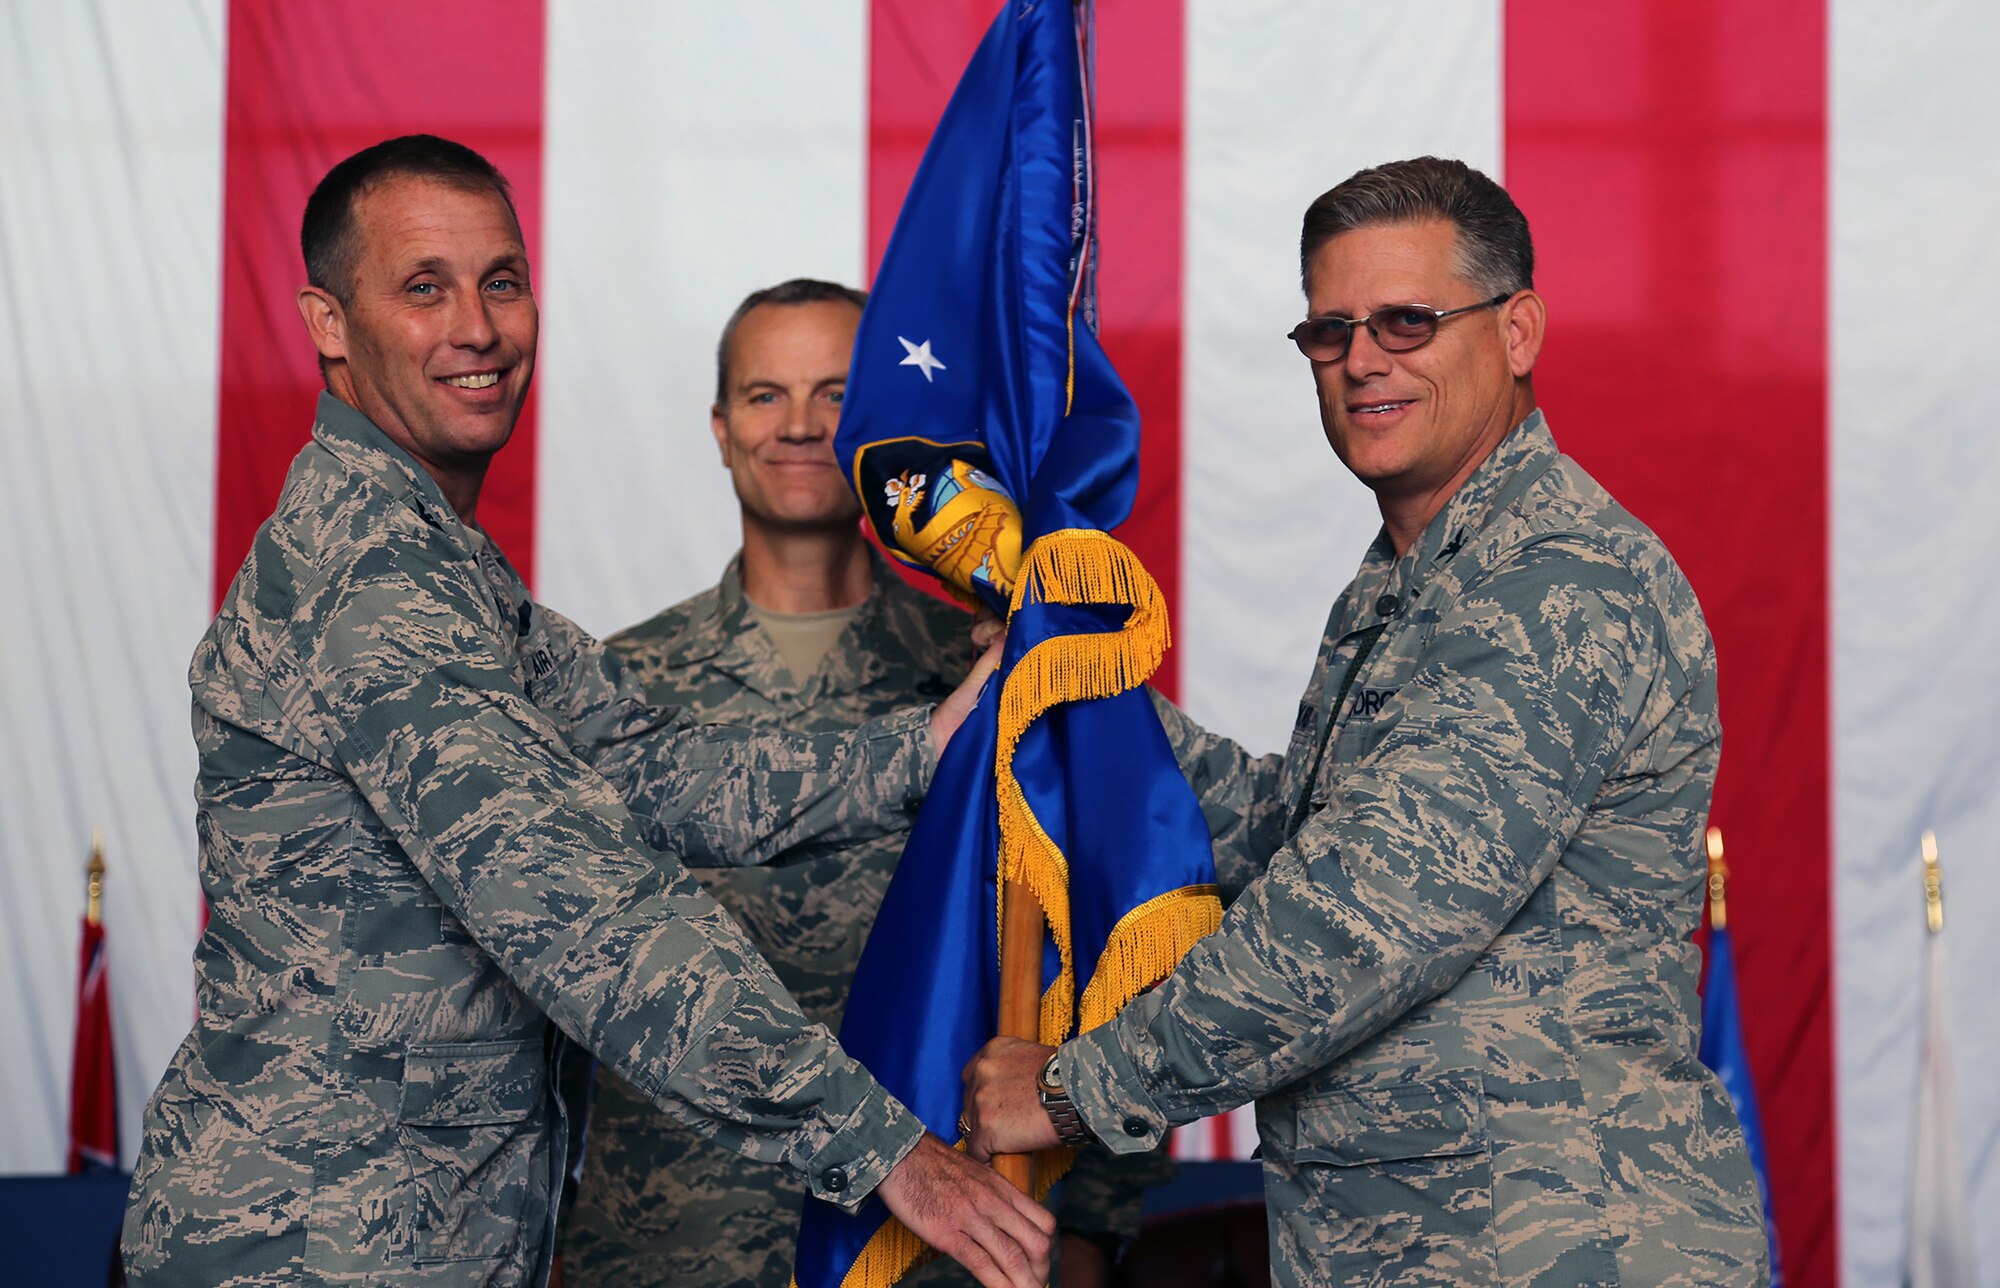 TRAVIS AIR FORCE BASE, Calif. -- Incoming 349th Maintenance Group Commander, Col. Jeff Pickard, receives the Group flag Col. Matt Burger, commander of the 349th Air Mobility Wing, and accepts command of the Group in a ceremony at Travis Air Force Base, Calif., Sept. 22, 2013. Pickard comes to Team Travis after serving as the commander 507th Maintenance Group, Tinker Air Force Base, Okla., since July 2011. A career maintenance officer, the colonel has deployed five times to expeditionary units in Europe, the Pacific and Southwest Asia as a maintenance officer in support of operations Ensuring Freedom and Iraqi Freedom.  (U.S. Air Force photo/Lt. Col. Robert Couse-Baker)